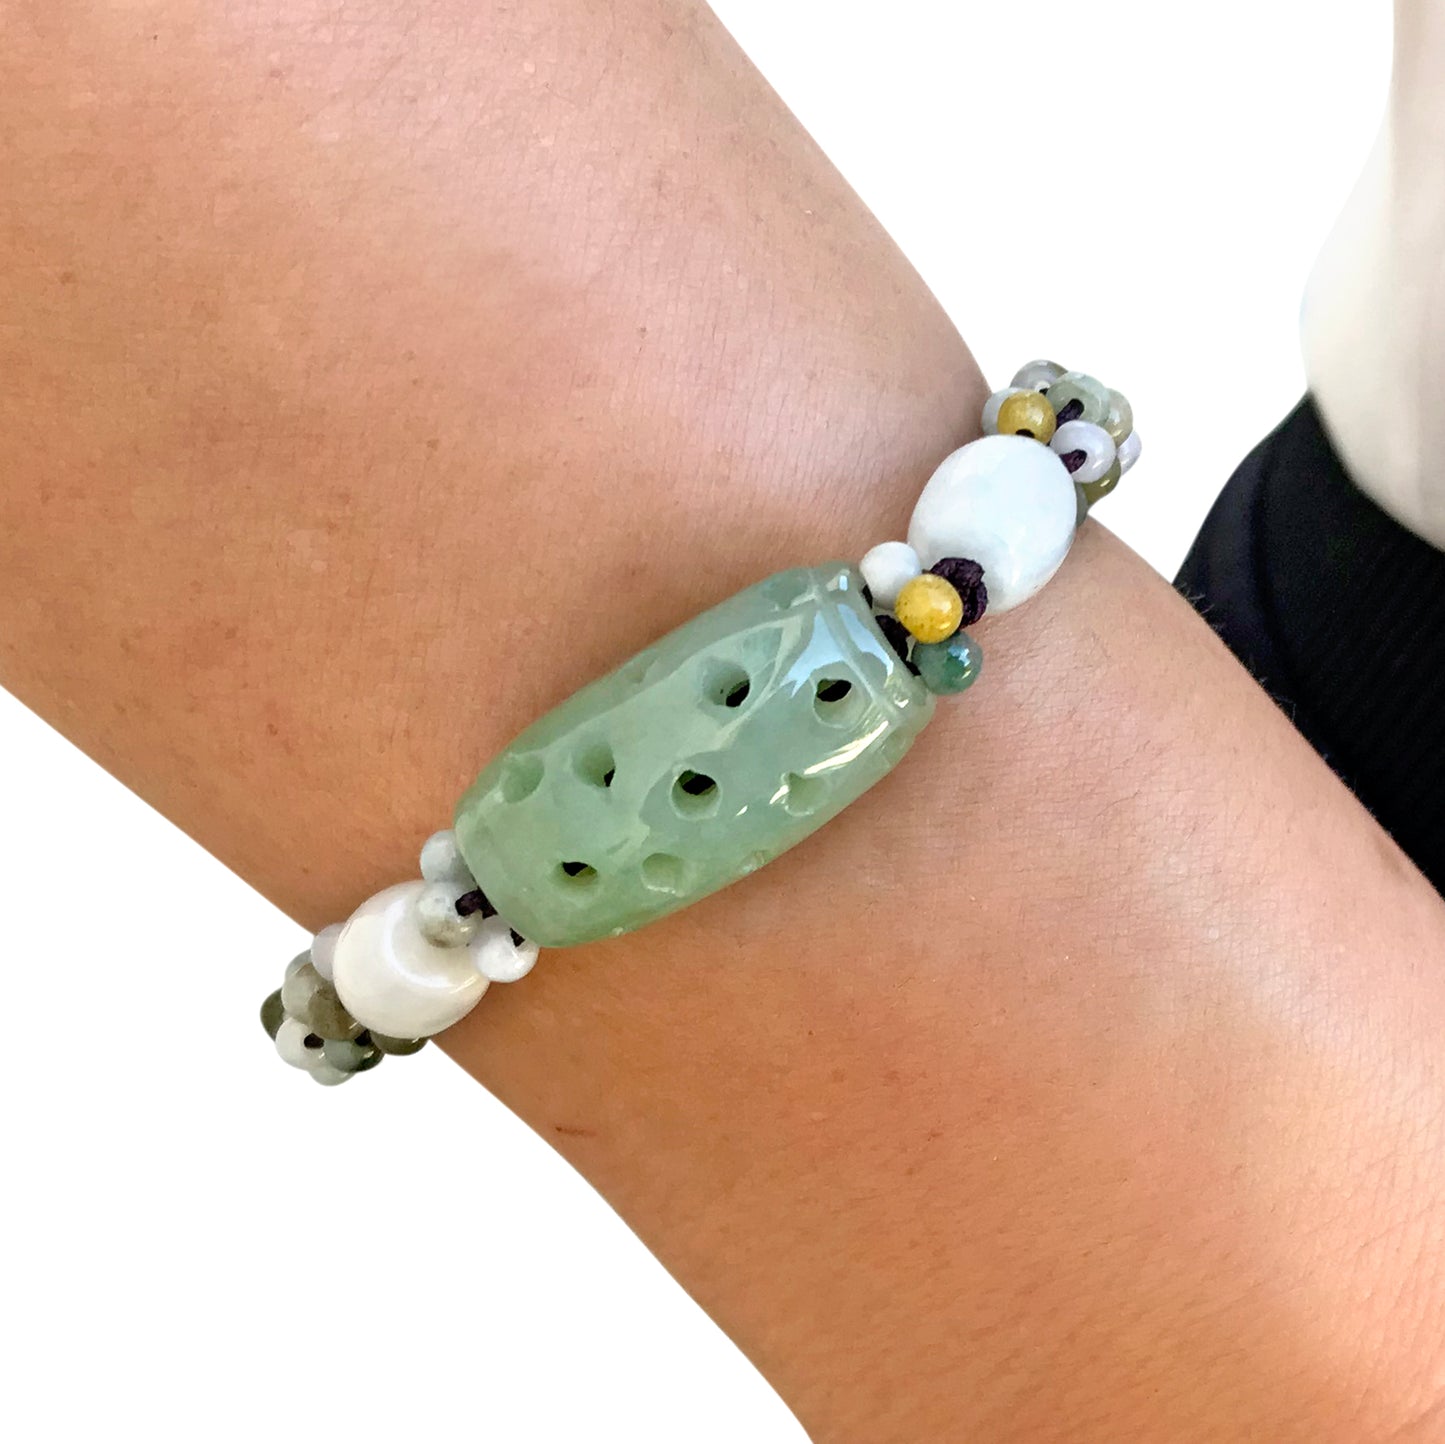 Add Positive Vibes to your Life with a Jade Bracelet